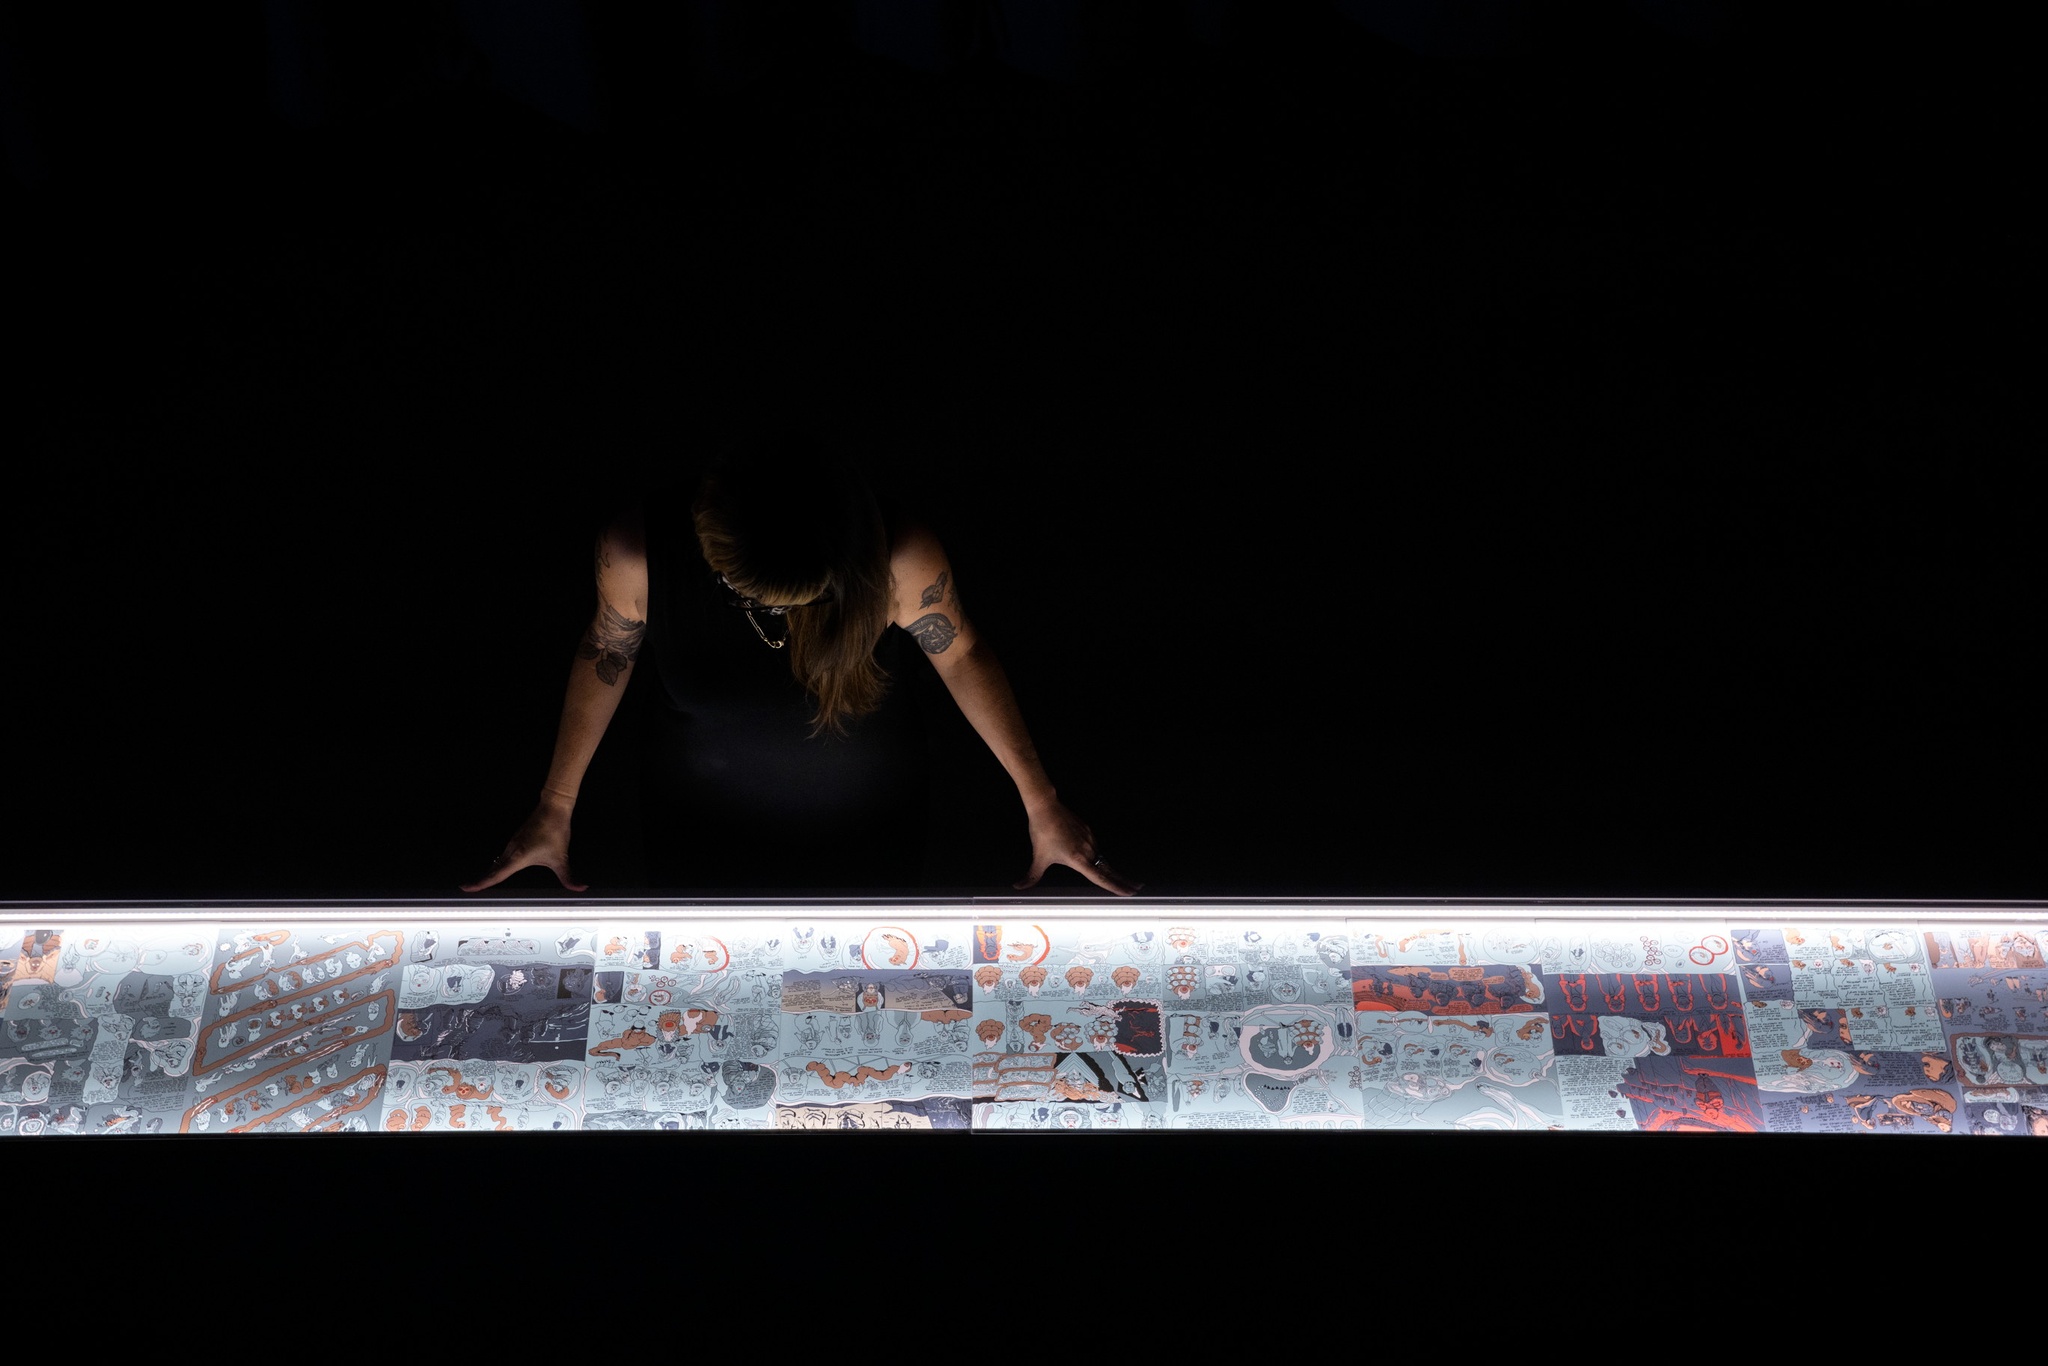 A person with tattooed arms leans out of the shadow over a light-box illuminating pages from a graphic novel